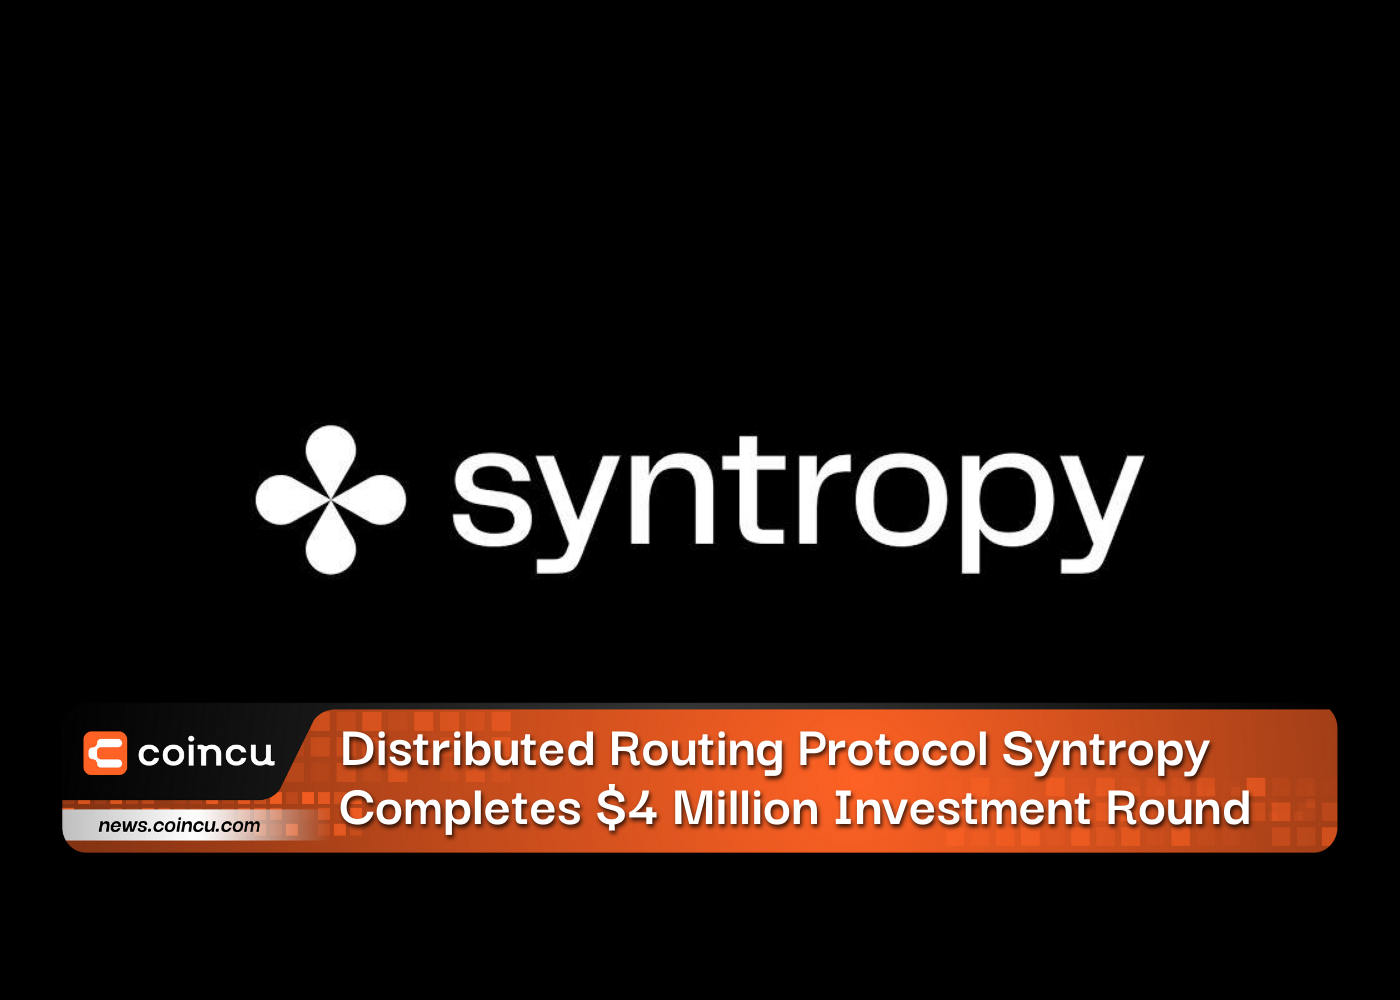 Distributed Routing Protocol Syntropy Completes $4 Million Investment Round